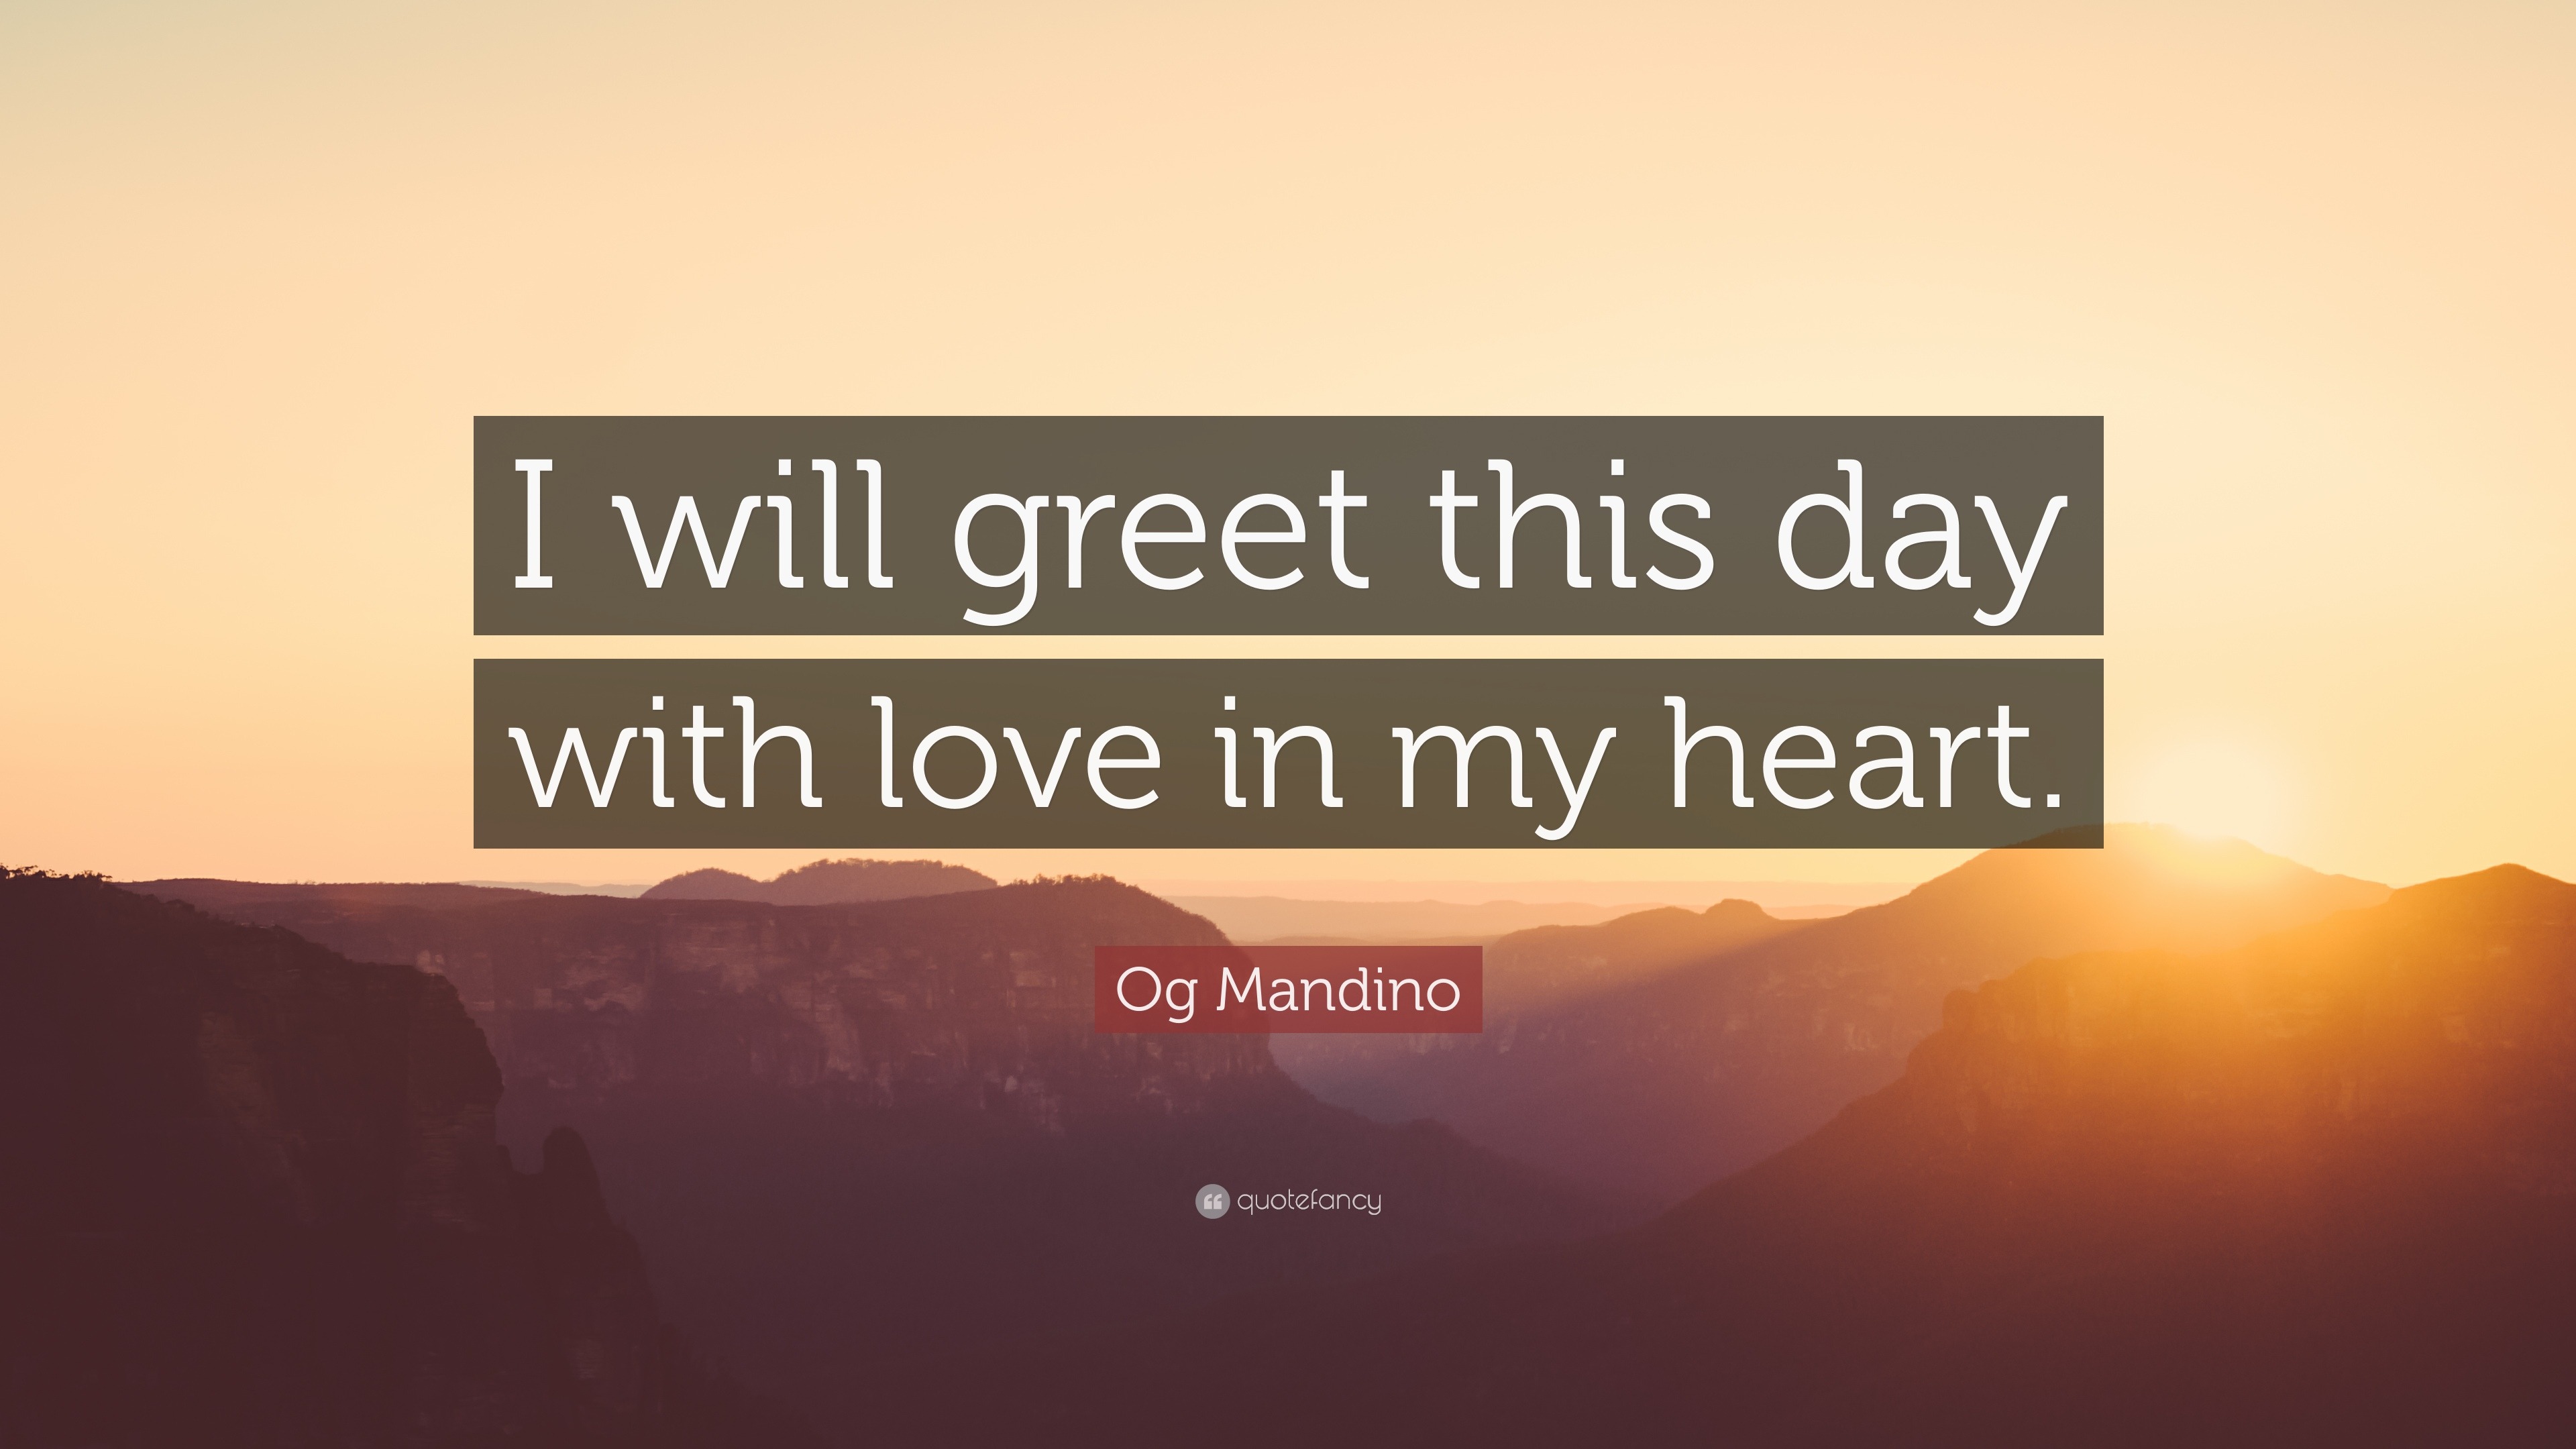 Og Mandino Quote “I will greet this day with love in my heart